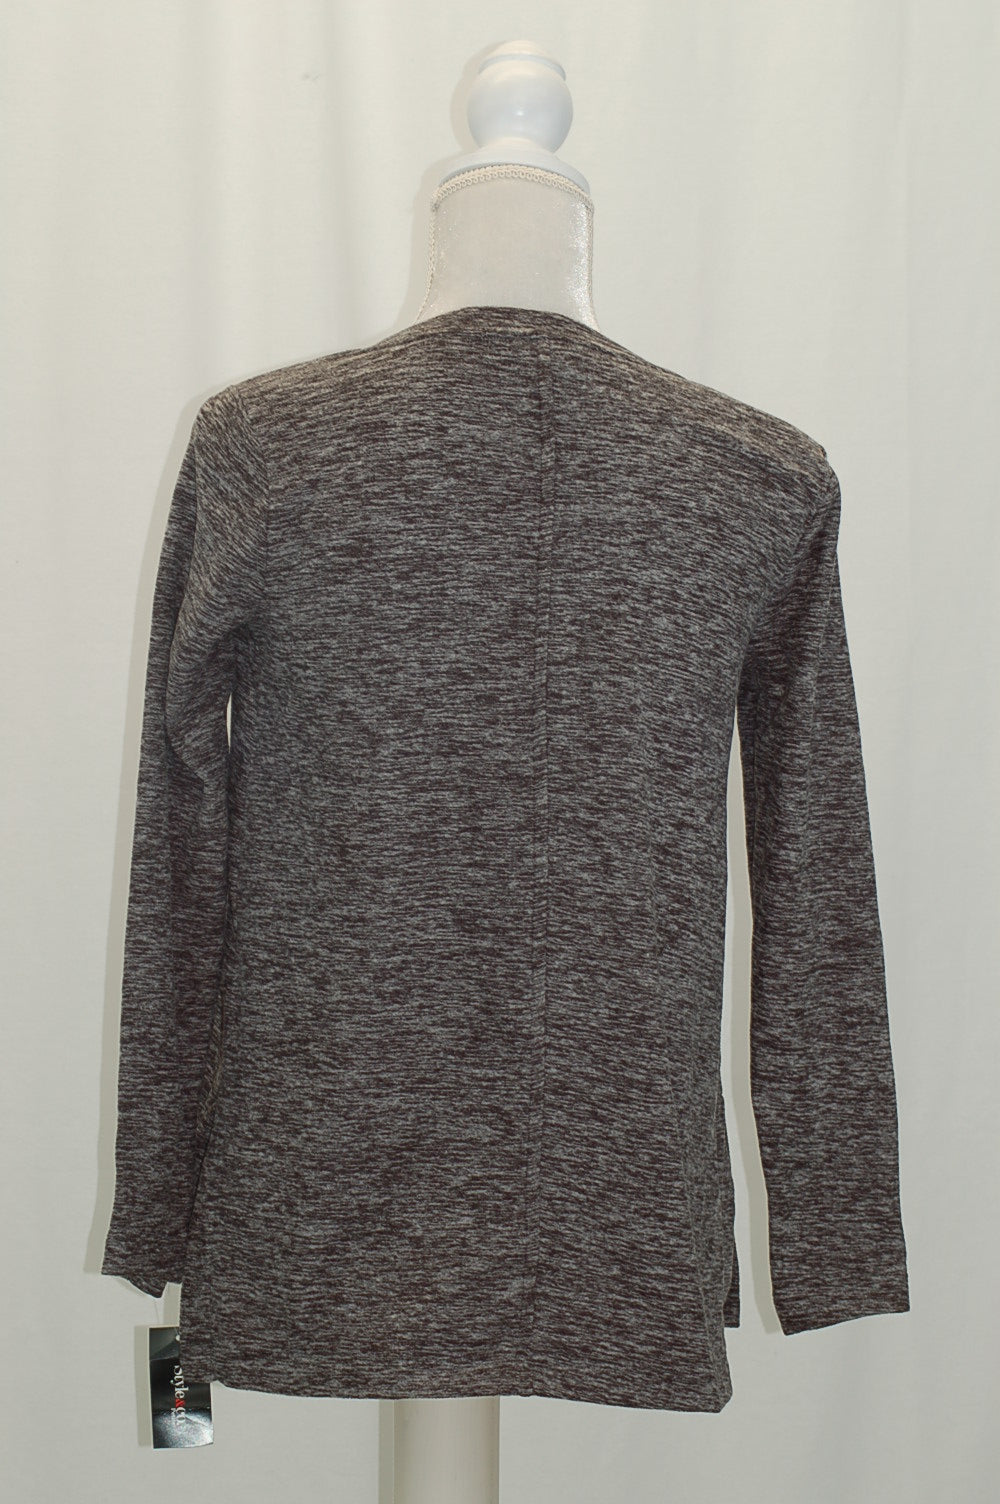 Style & Co. Petite Space-Dyed Sweater (Grey, PM)